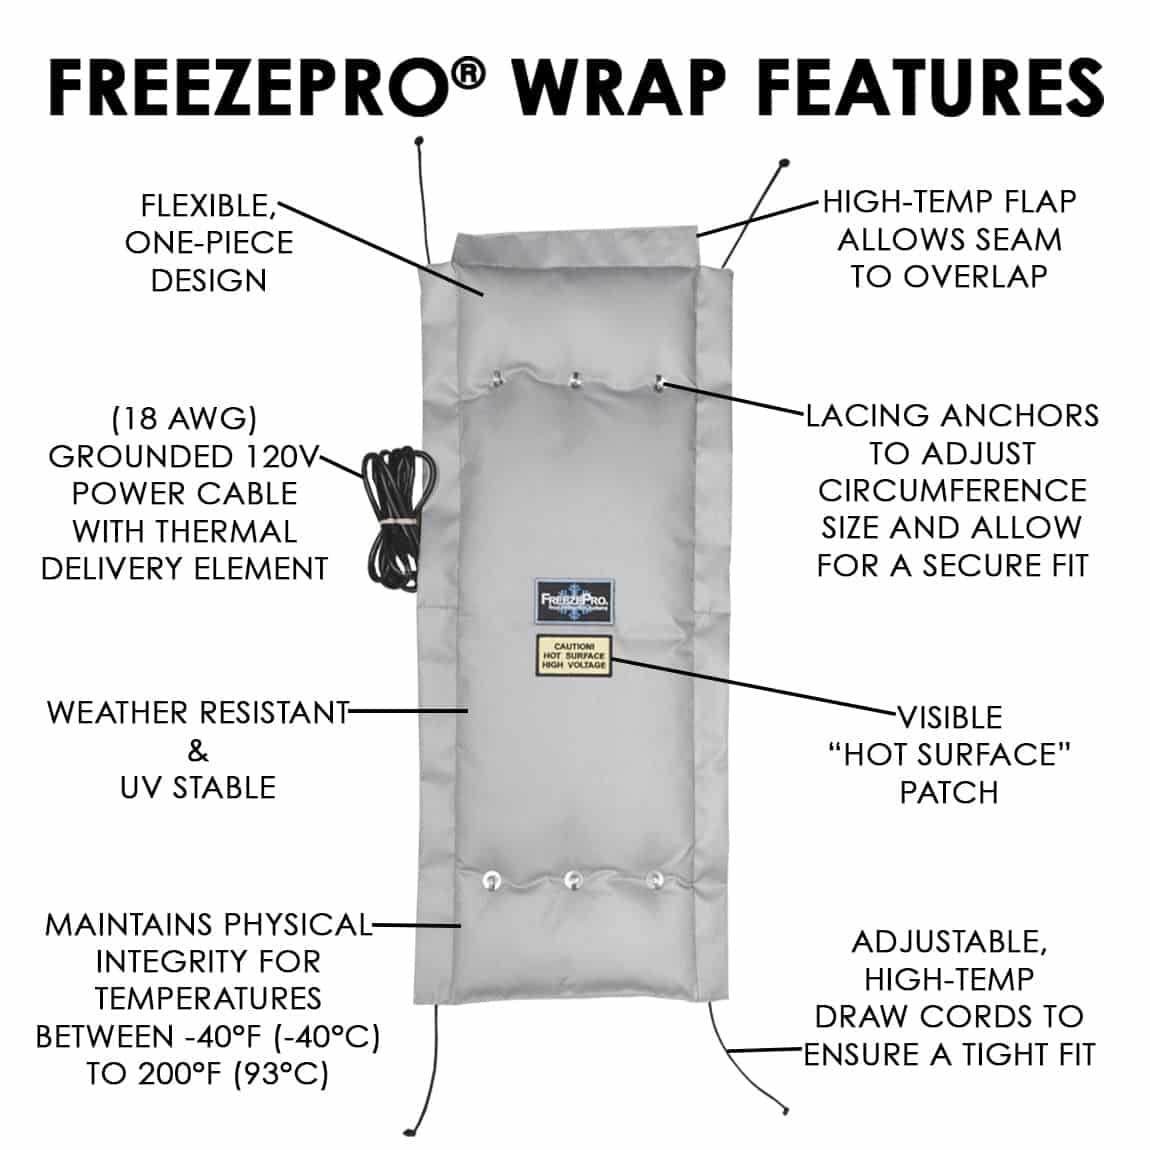 Freeze Protection (FP): How to Protect Pipes From Freezing?